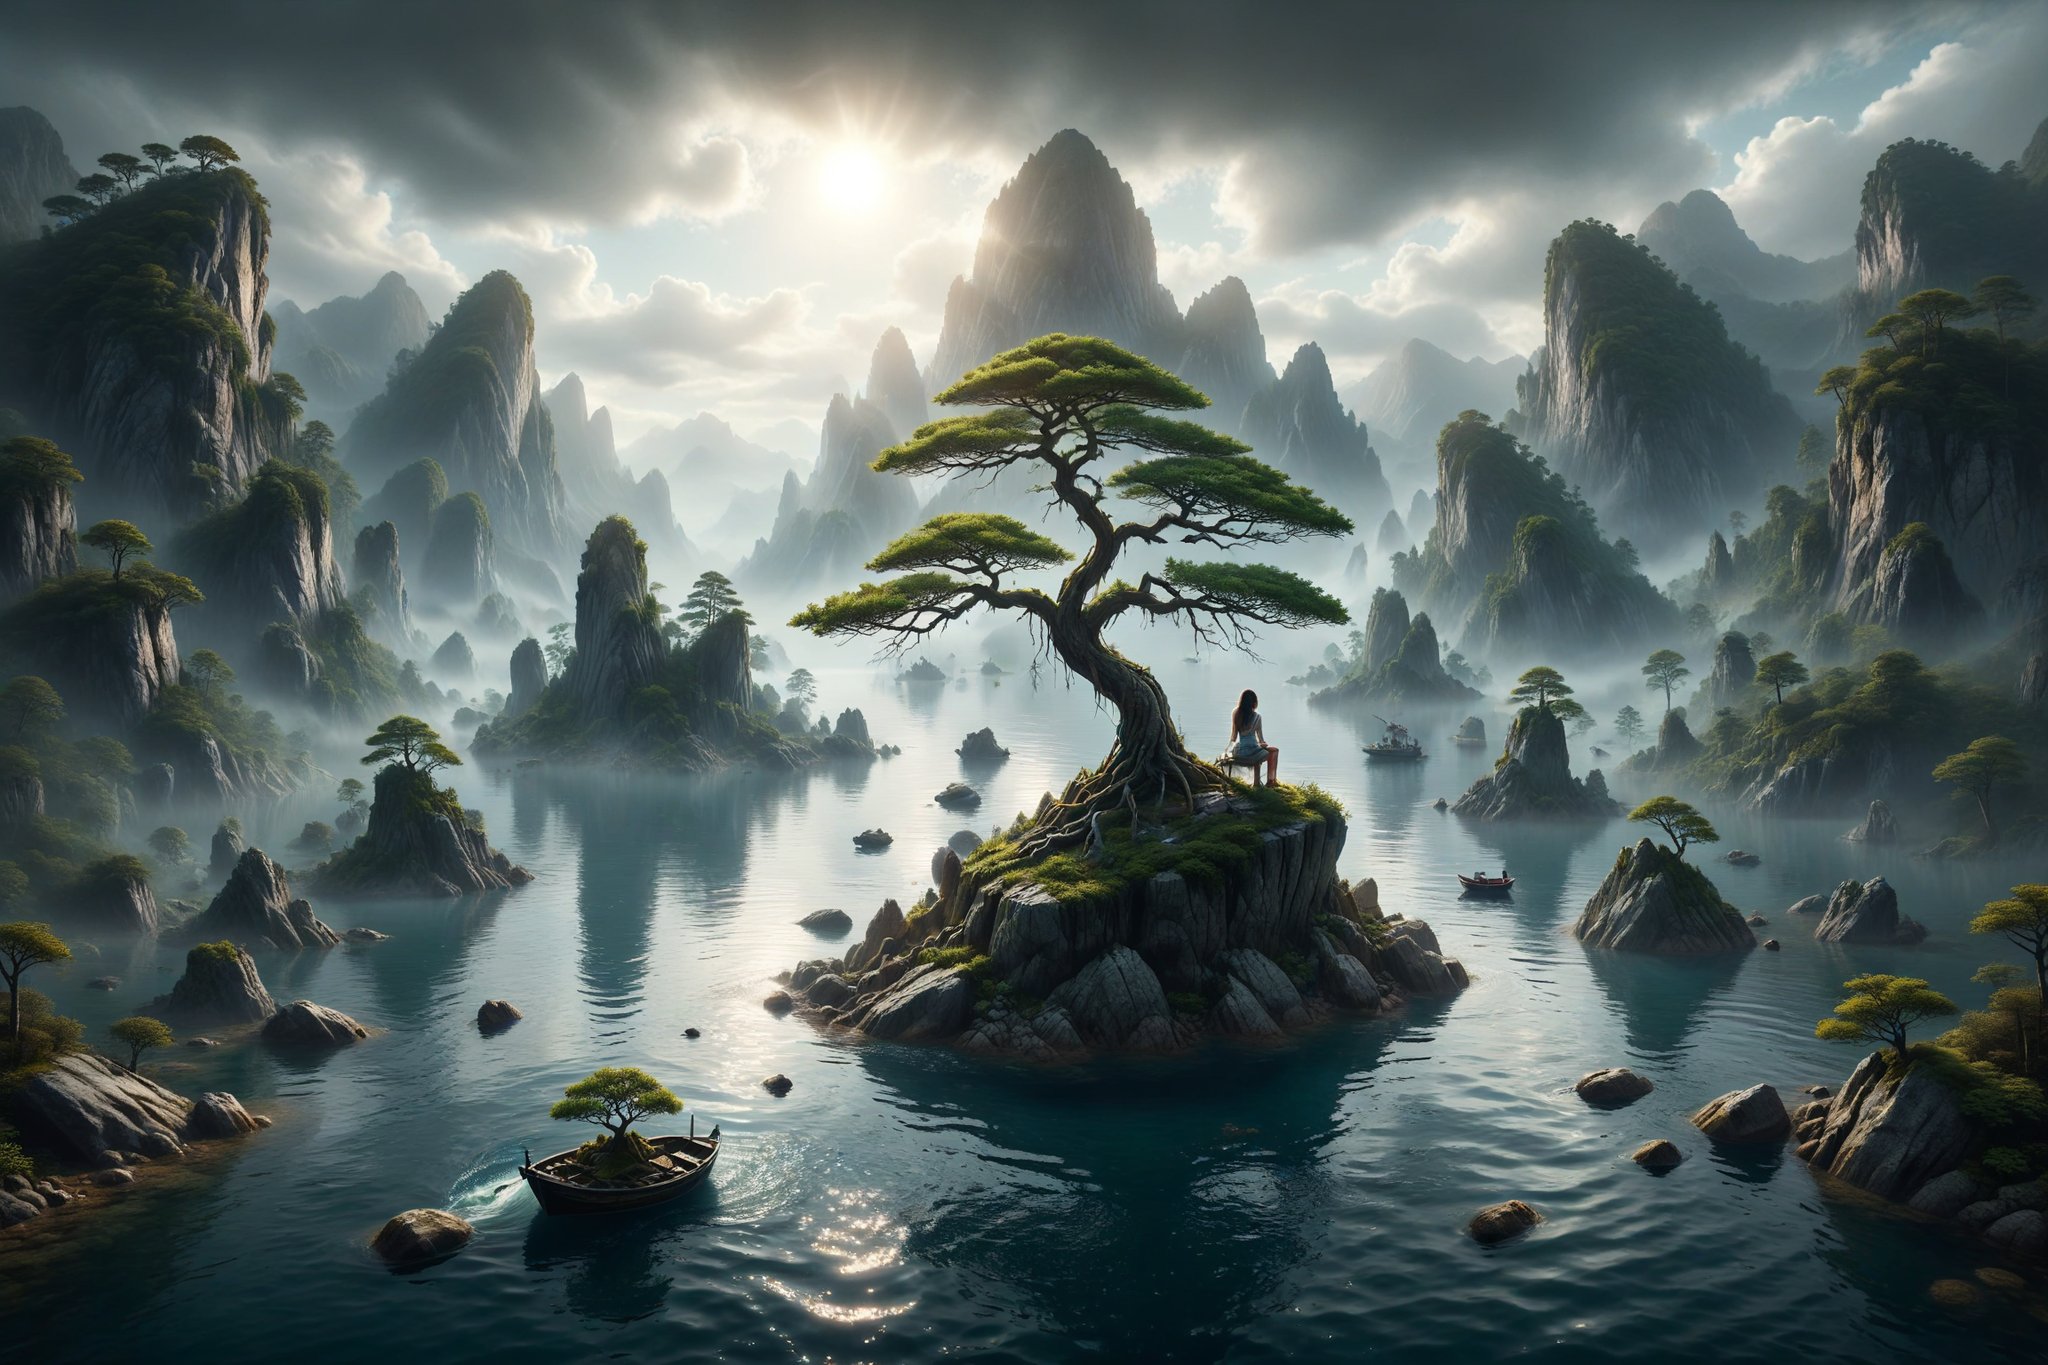 breathtaking concept art of the middle of a lake with little island in mountain landscape, a rock with a bonsai growing out of it, a girl sitting on a boat floating in the water